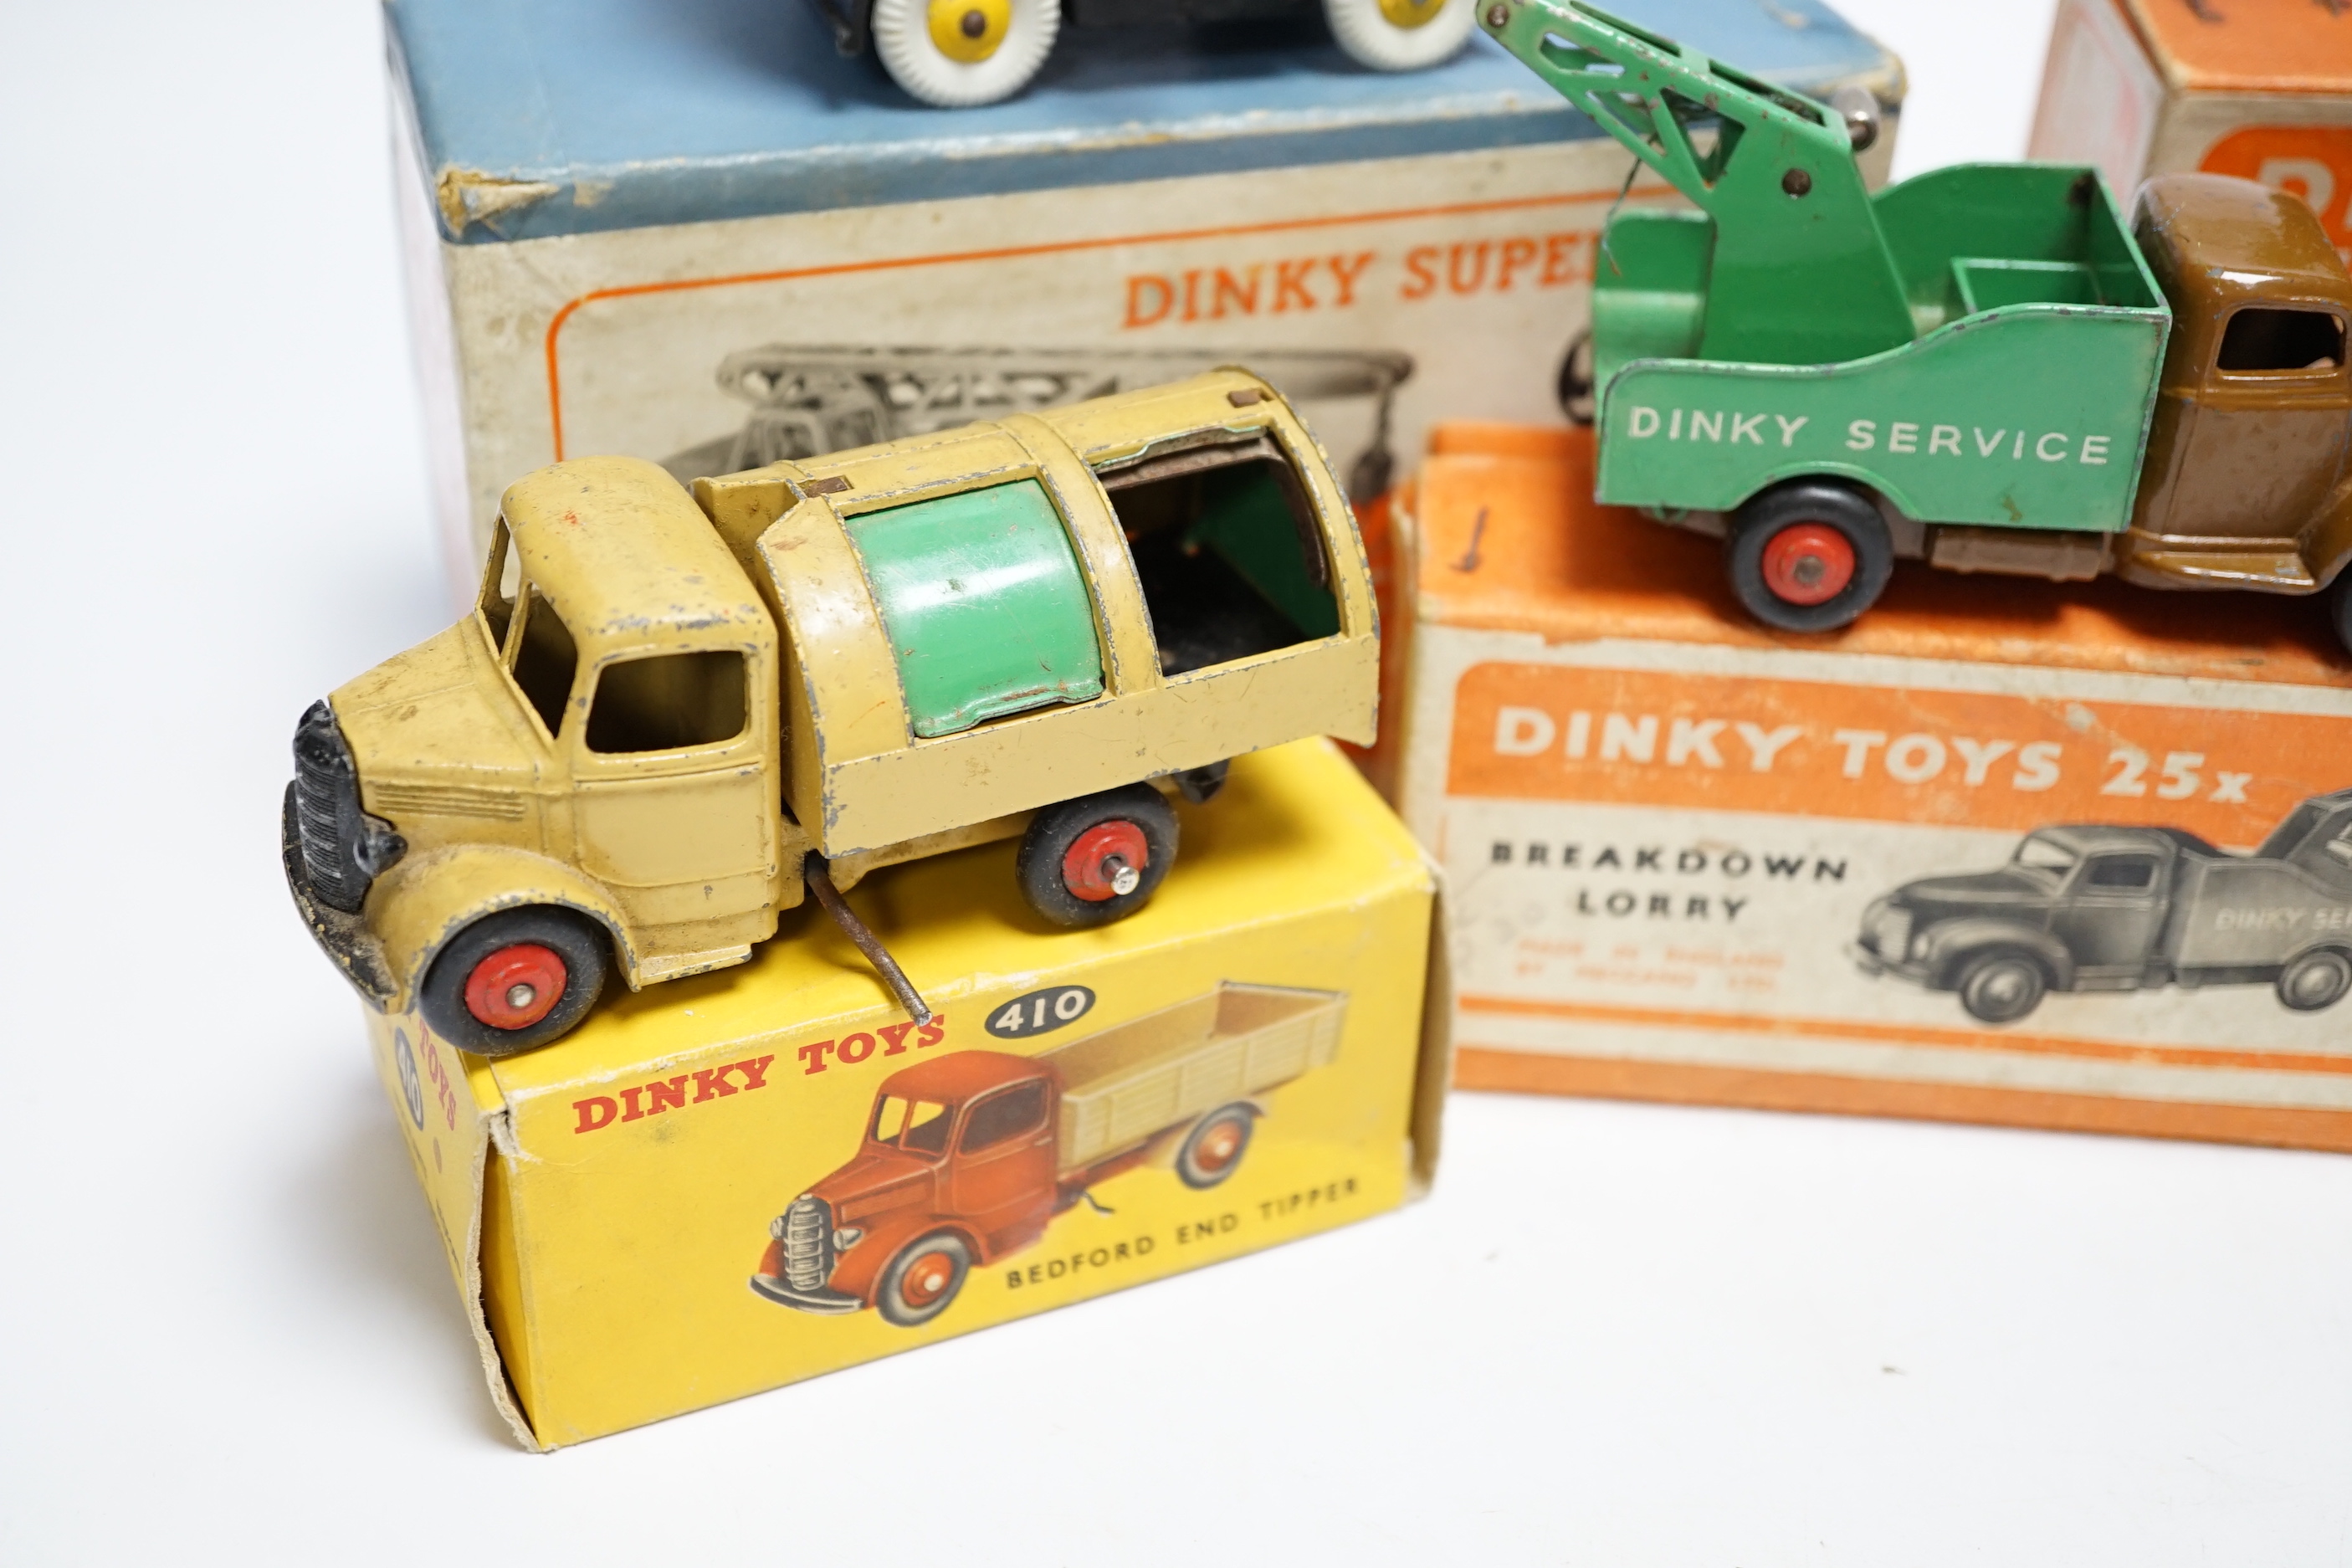 Five boxed dinky toys including (25x) breakdown lorry, (410) Bedford End Tipper, (555) Fire Engine, (571) Coles Mobile Crane, and (14c) Coventry Climax Fork Lift Truck